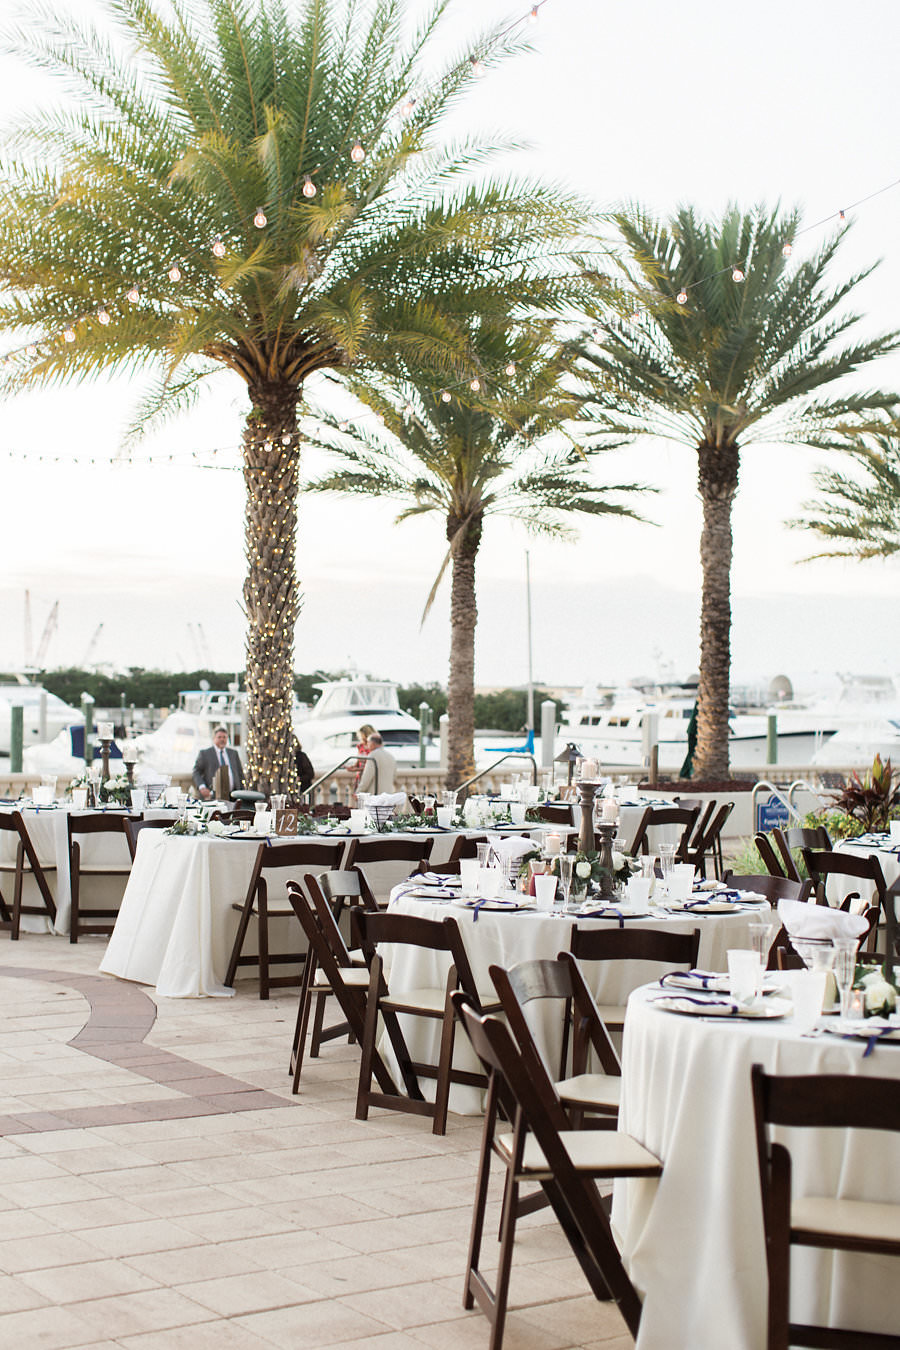 Outdoor Waterfront Wedding Reception with Round White Linen Tables, Blue Napkins, Wooden Folding Chairs | Tampa Bay Wedding Planner Unique Weddings and Events | Venue The Westshore Yacht Club